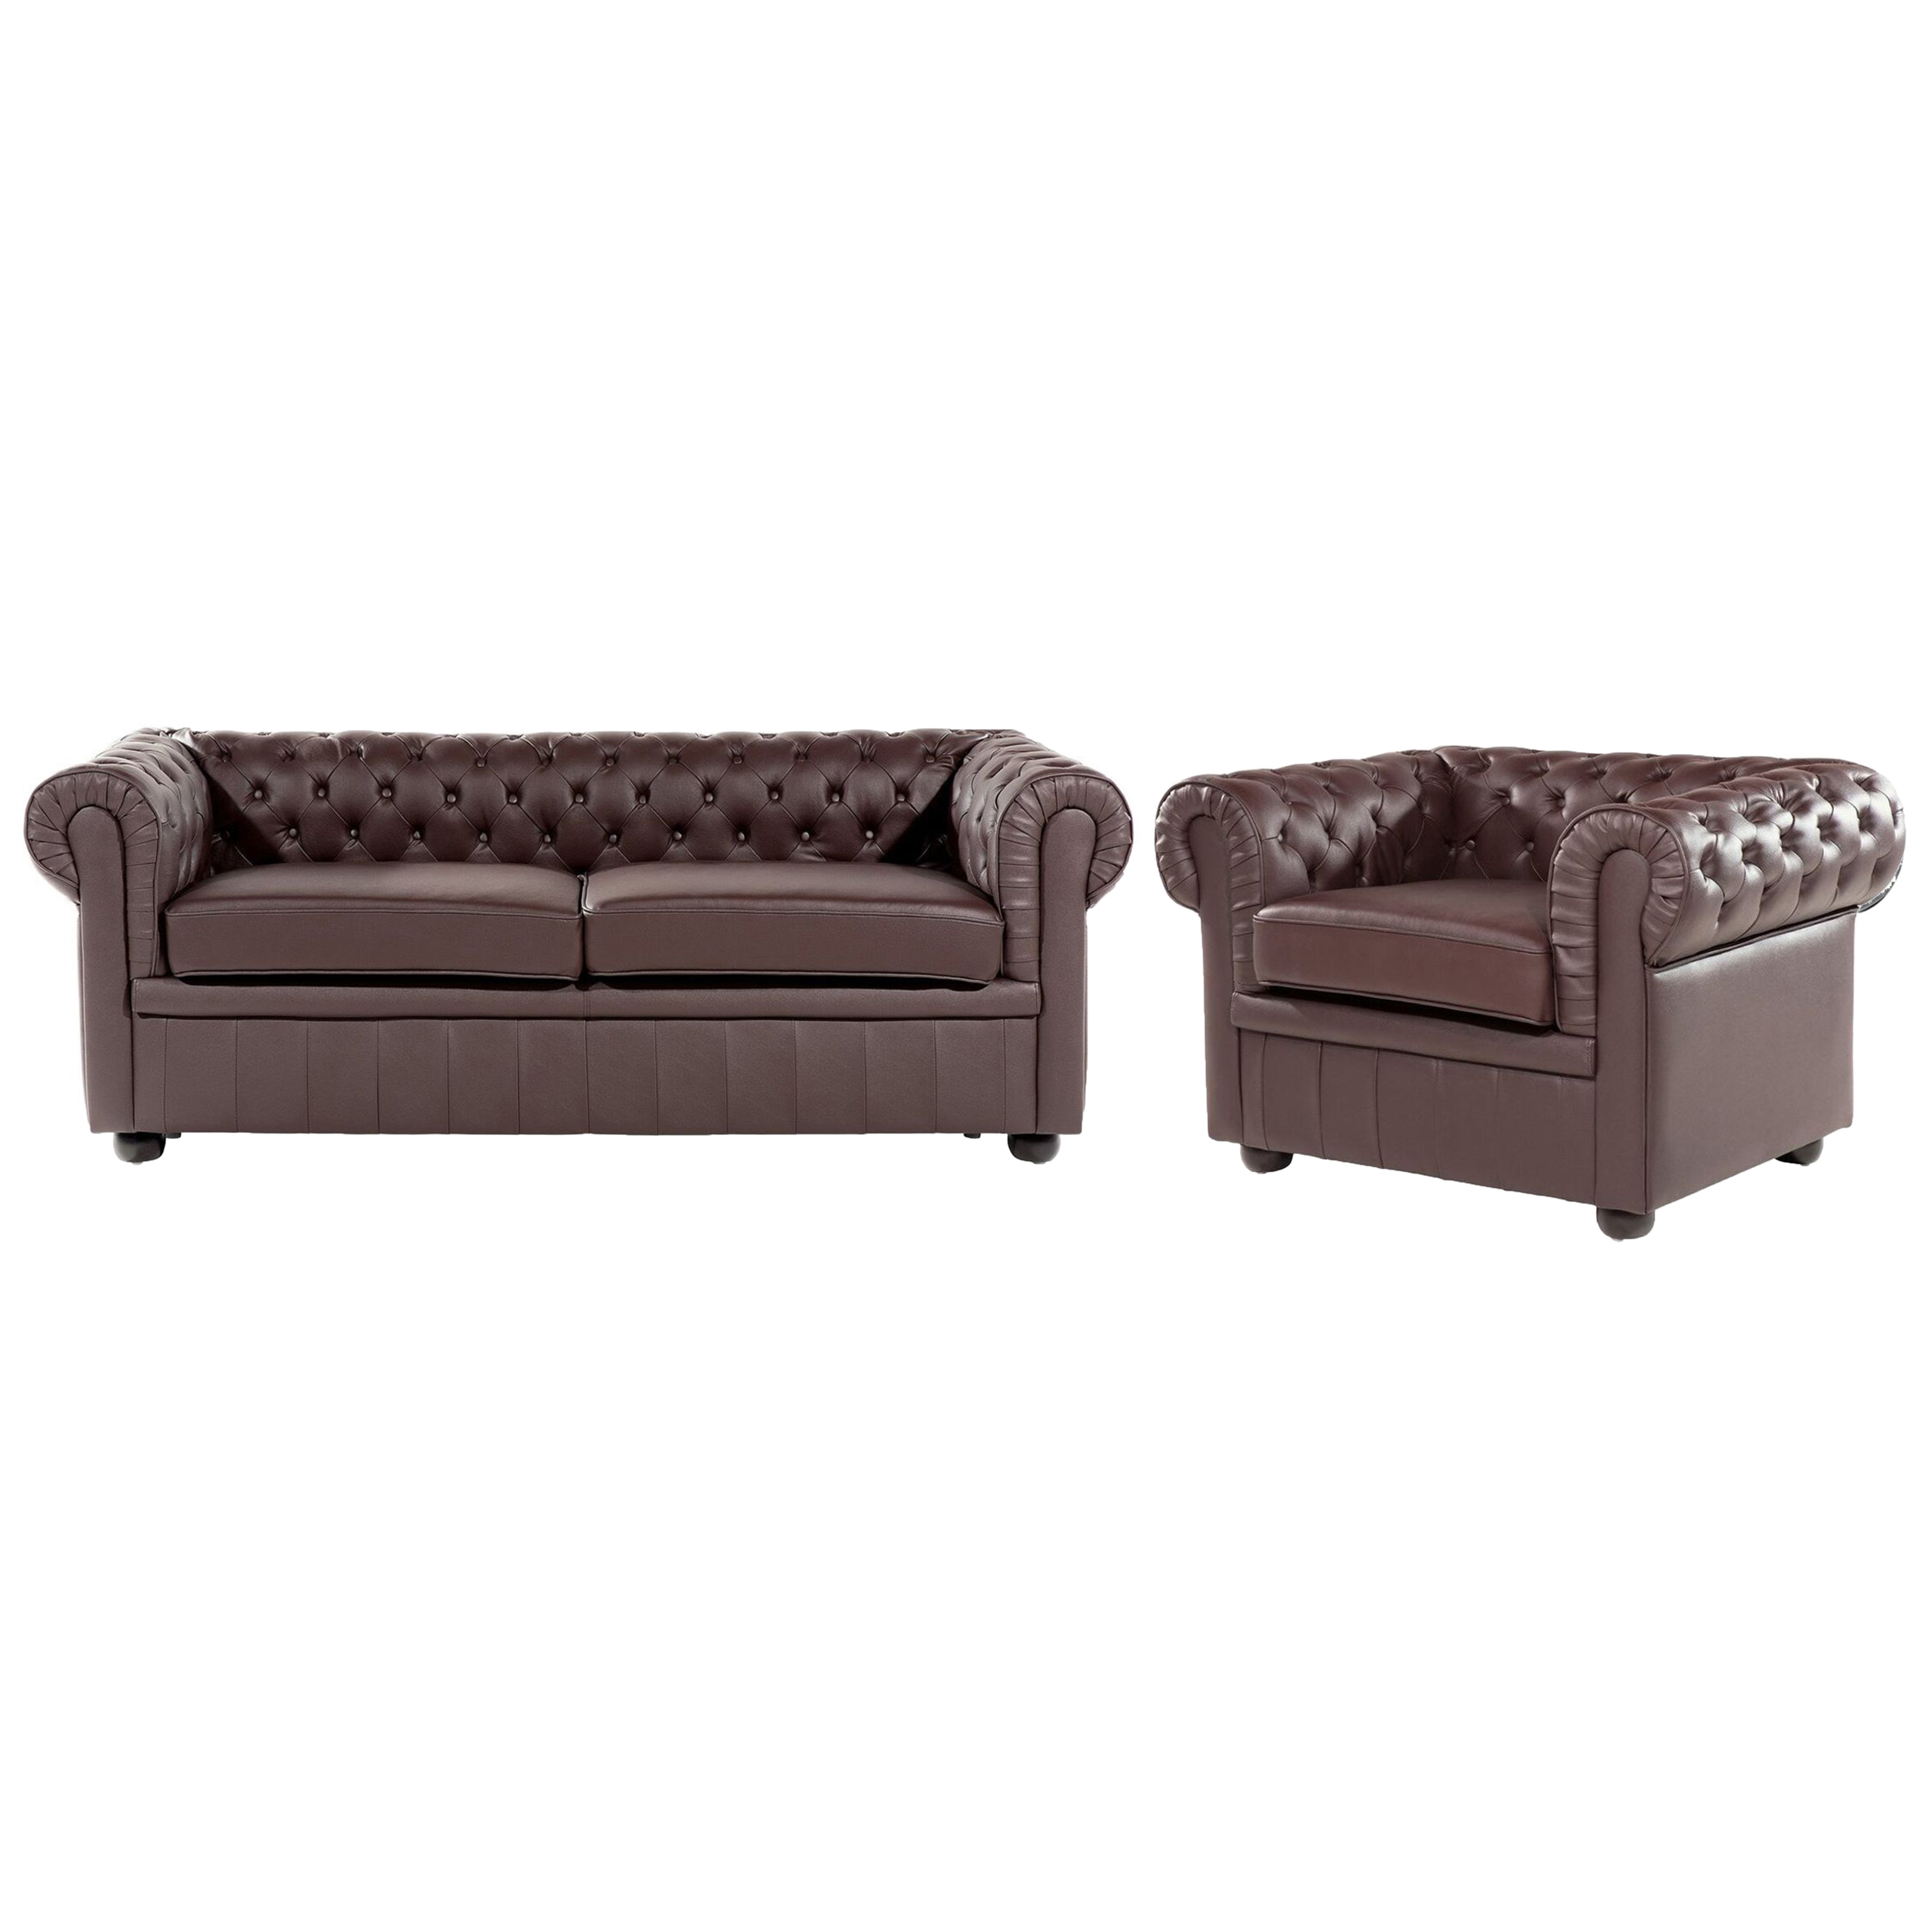 Beliani Chesterfield Living Room Set Brown Leather Upholstery Dark Wood Legs 3 Seater Sofa + Armchair Contemporary